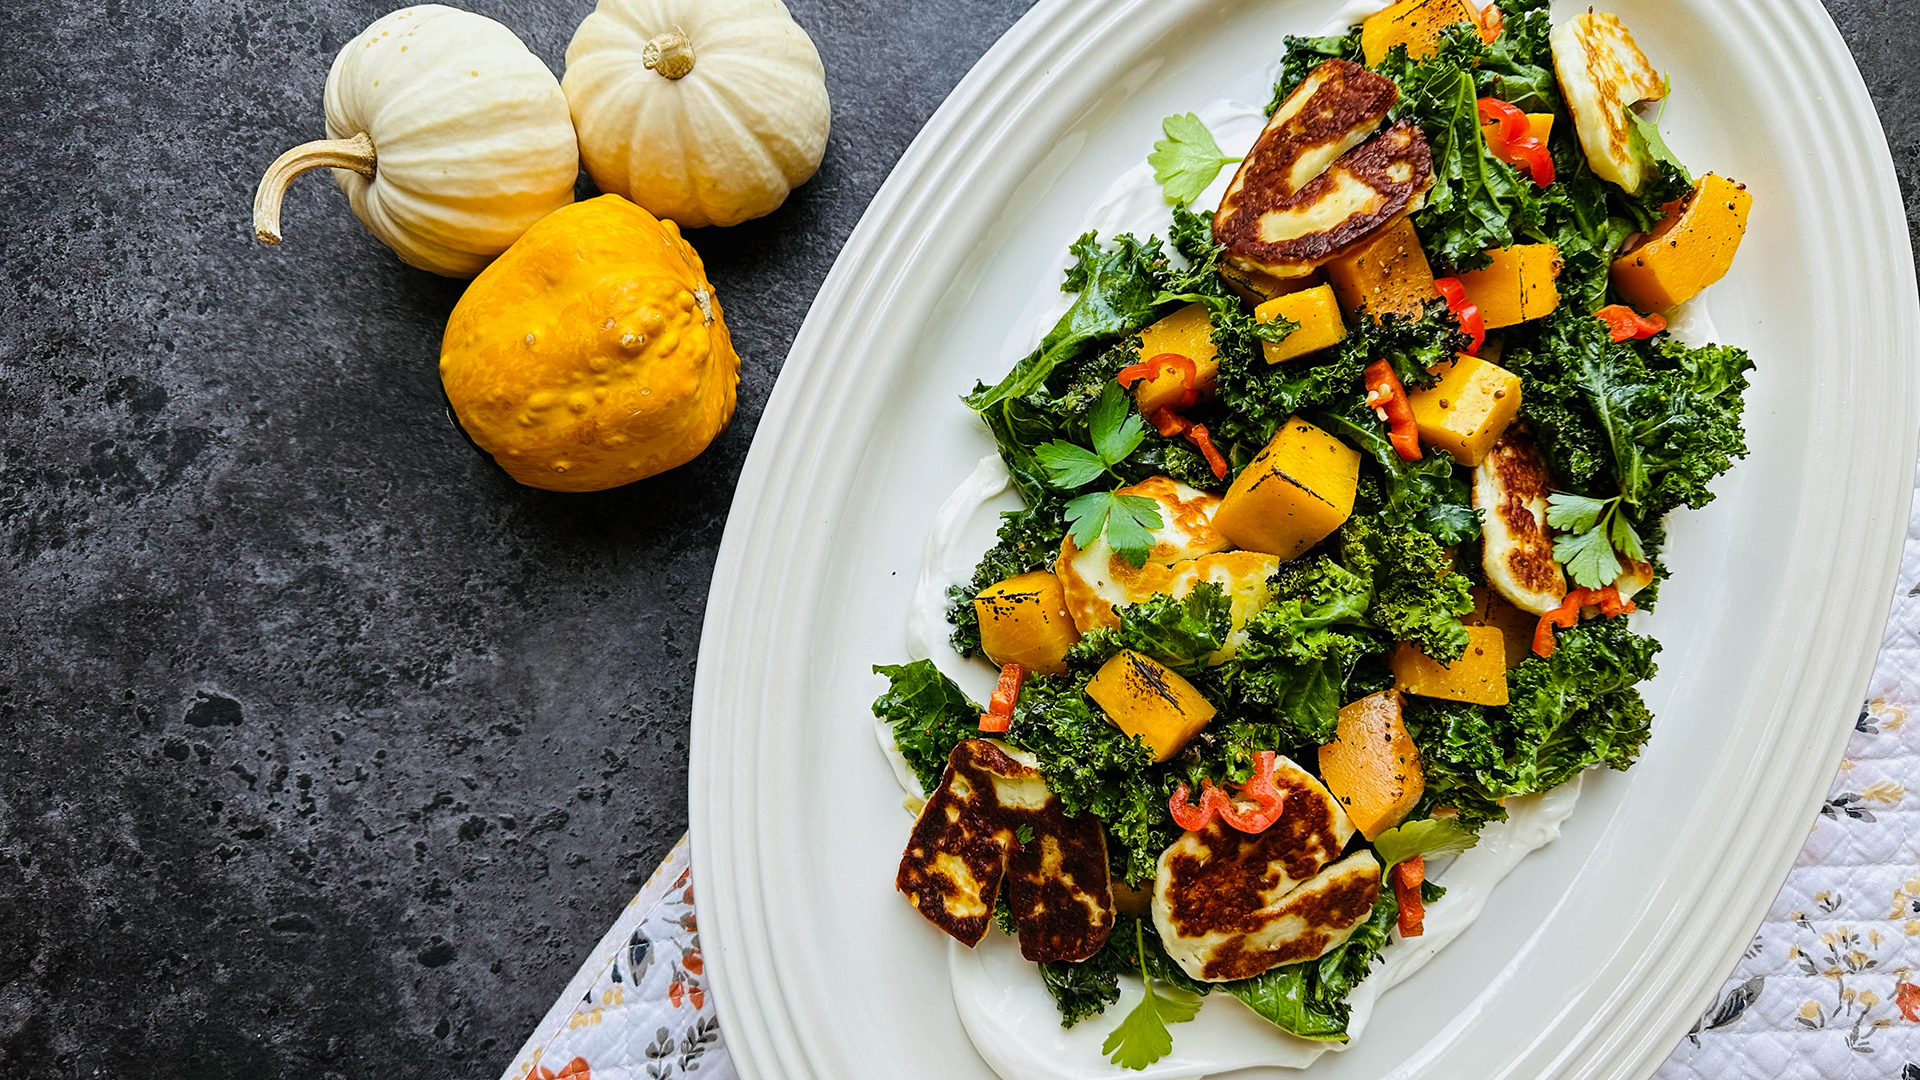 Roasted Squash with Greens and Halloumi